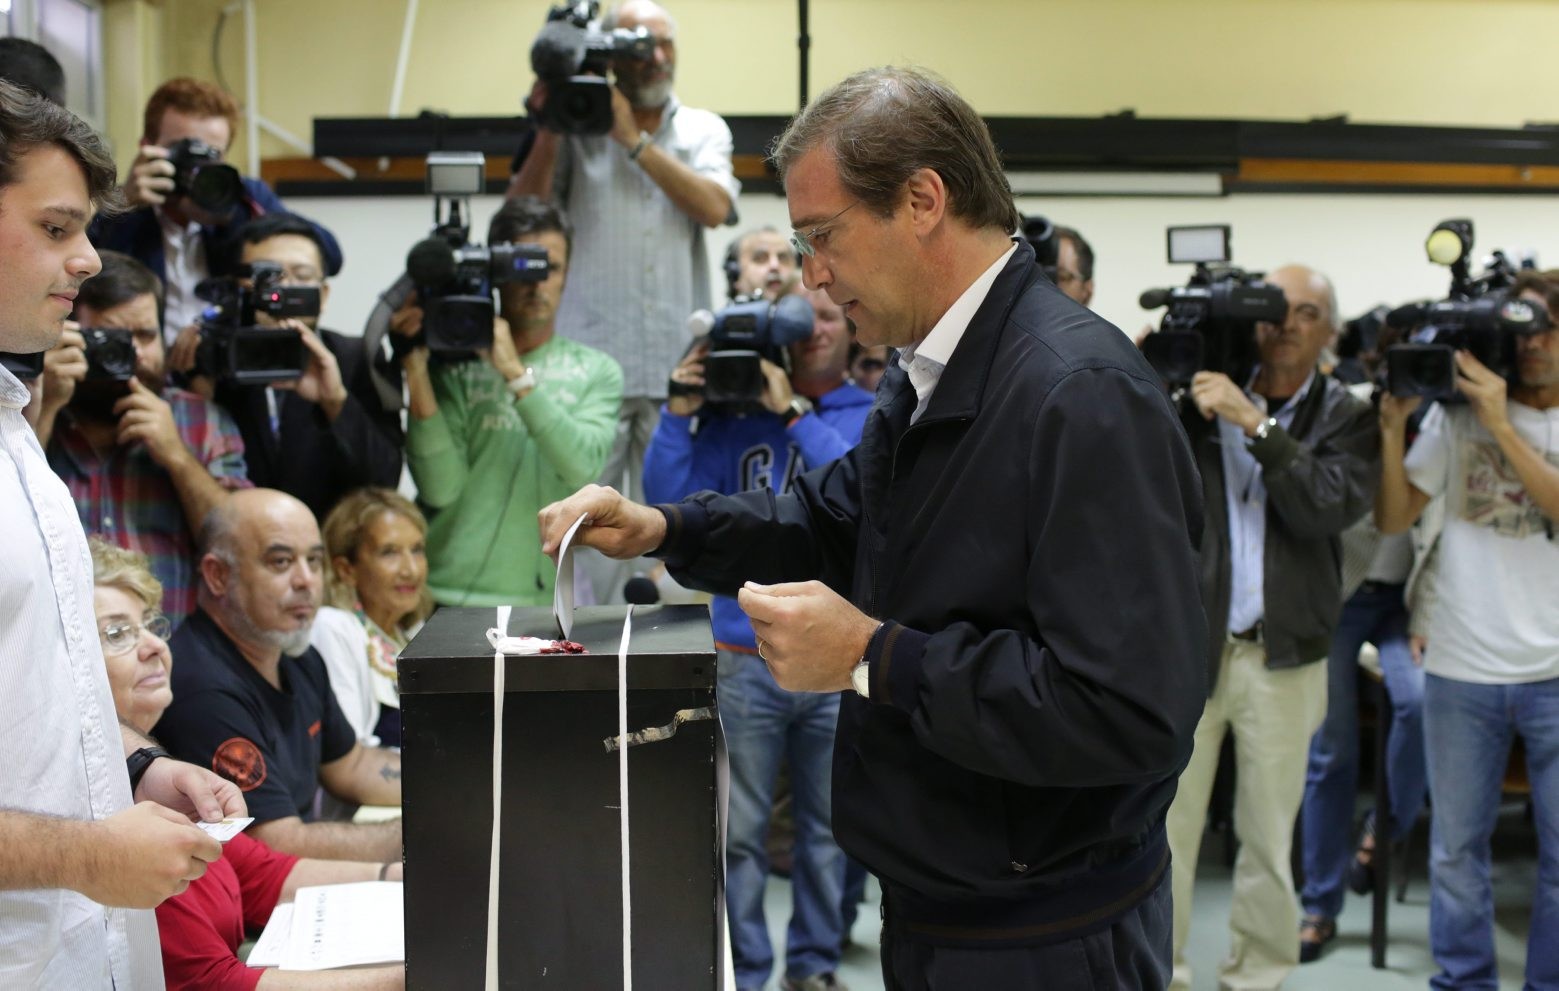 Portuguese Prime Minister Pedro Passos Coelho casts his ballot in Portugal's general elections Sunday, Oct. 4, 2015, in Massama, outside Lisbon. The last polls ahead of Sunday's election showed the center-right ruling coalition roughly level  with the center-left Socialist Party, the main opposition. (AP Photo/Armando Franca) Portugal Elections